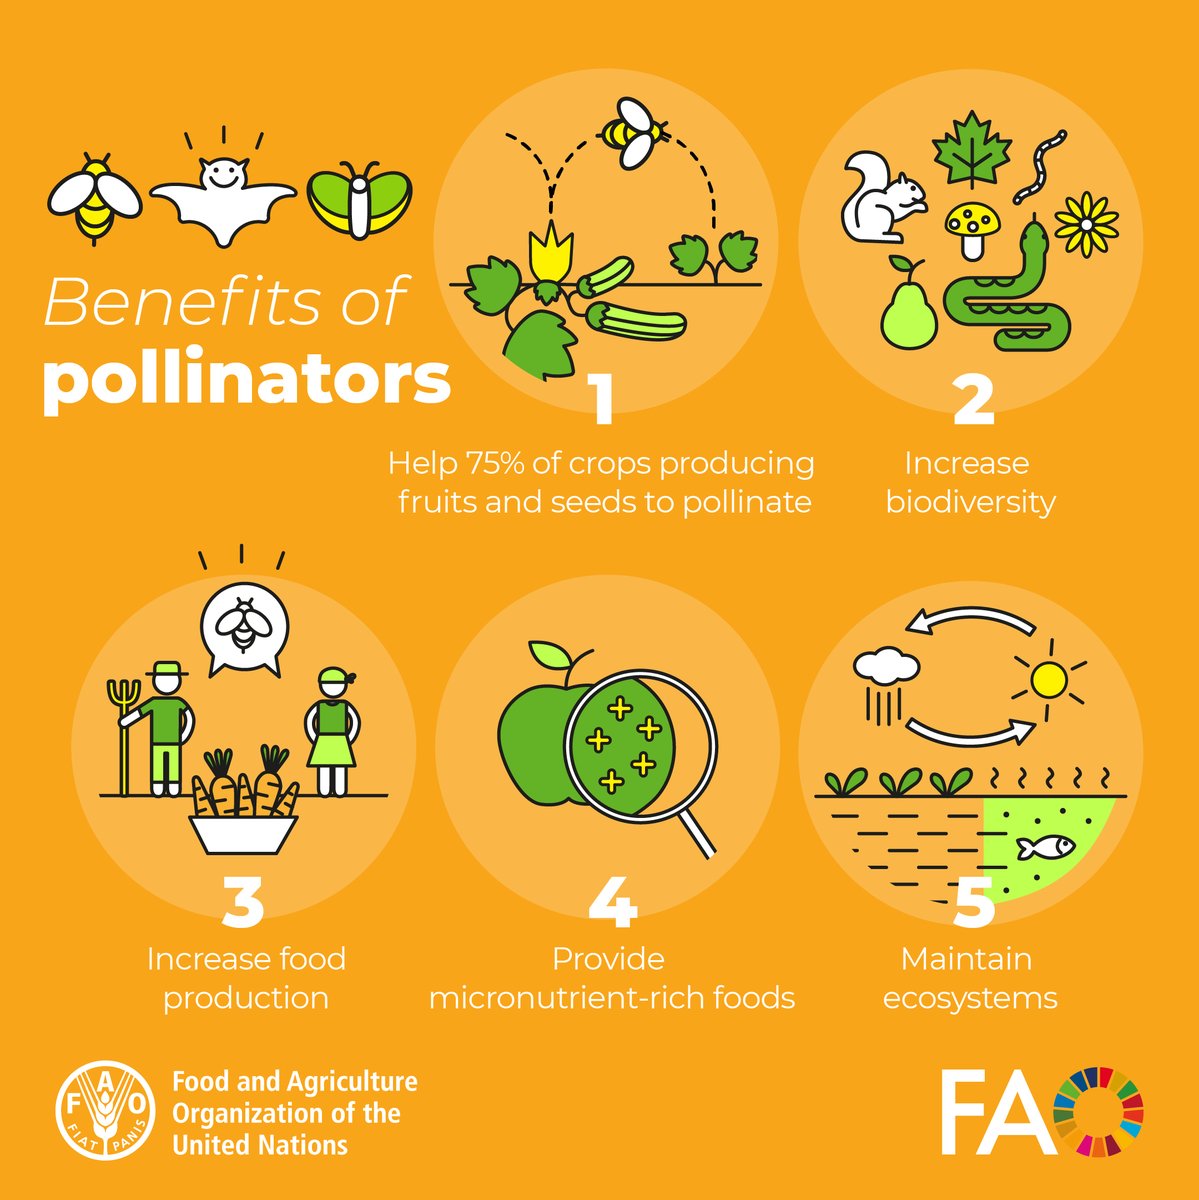 Happy #WorldBeeDay!🐝 Pollinators allow many plants, including #food crops, to reproduce. Indeed, the food that we eat, such as fruits & vegetables, directly relies on pollinators. A world without pollinators would equal a world without blueberries, coffee, chocolate, and more.